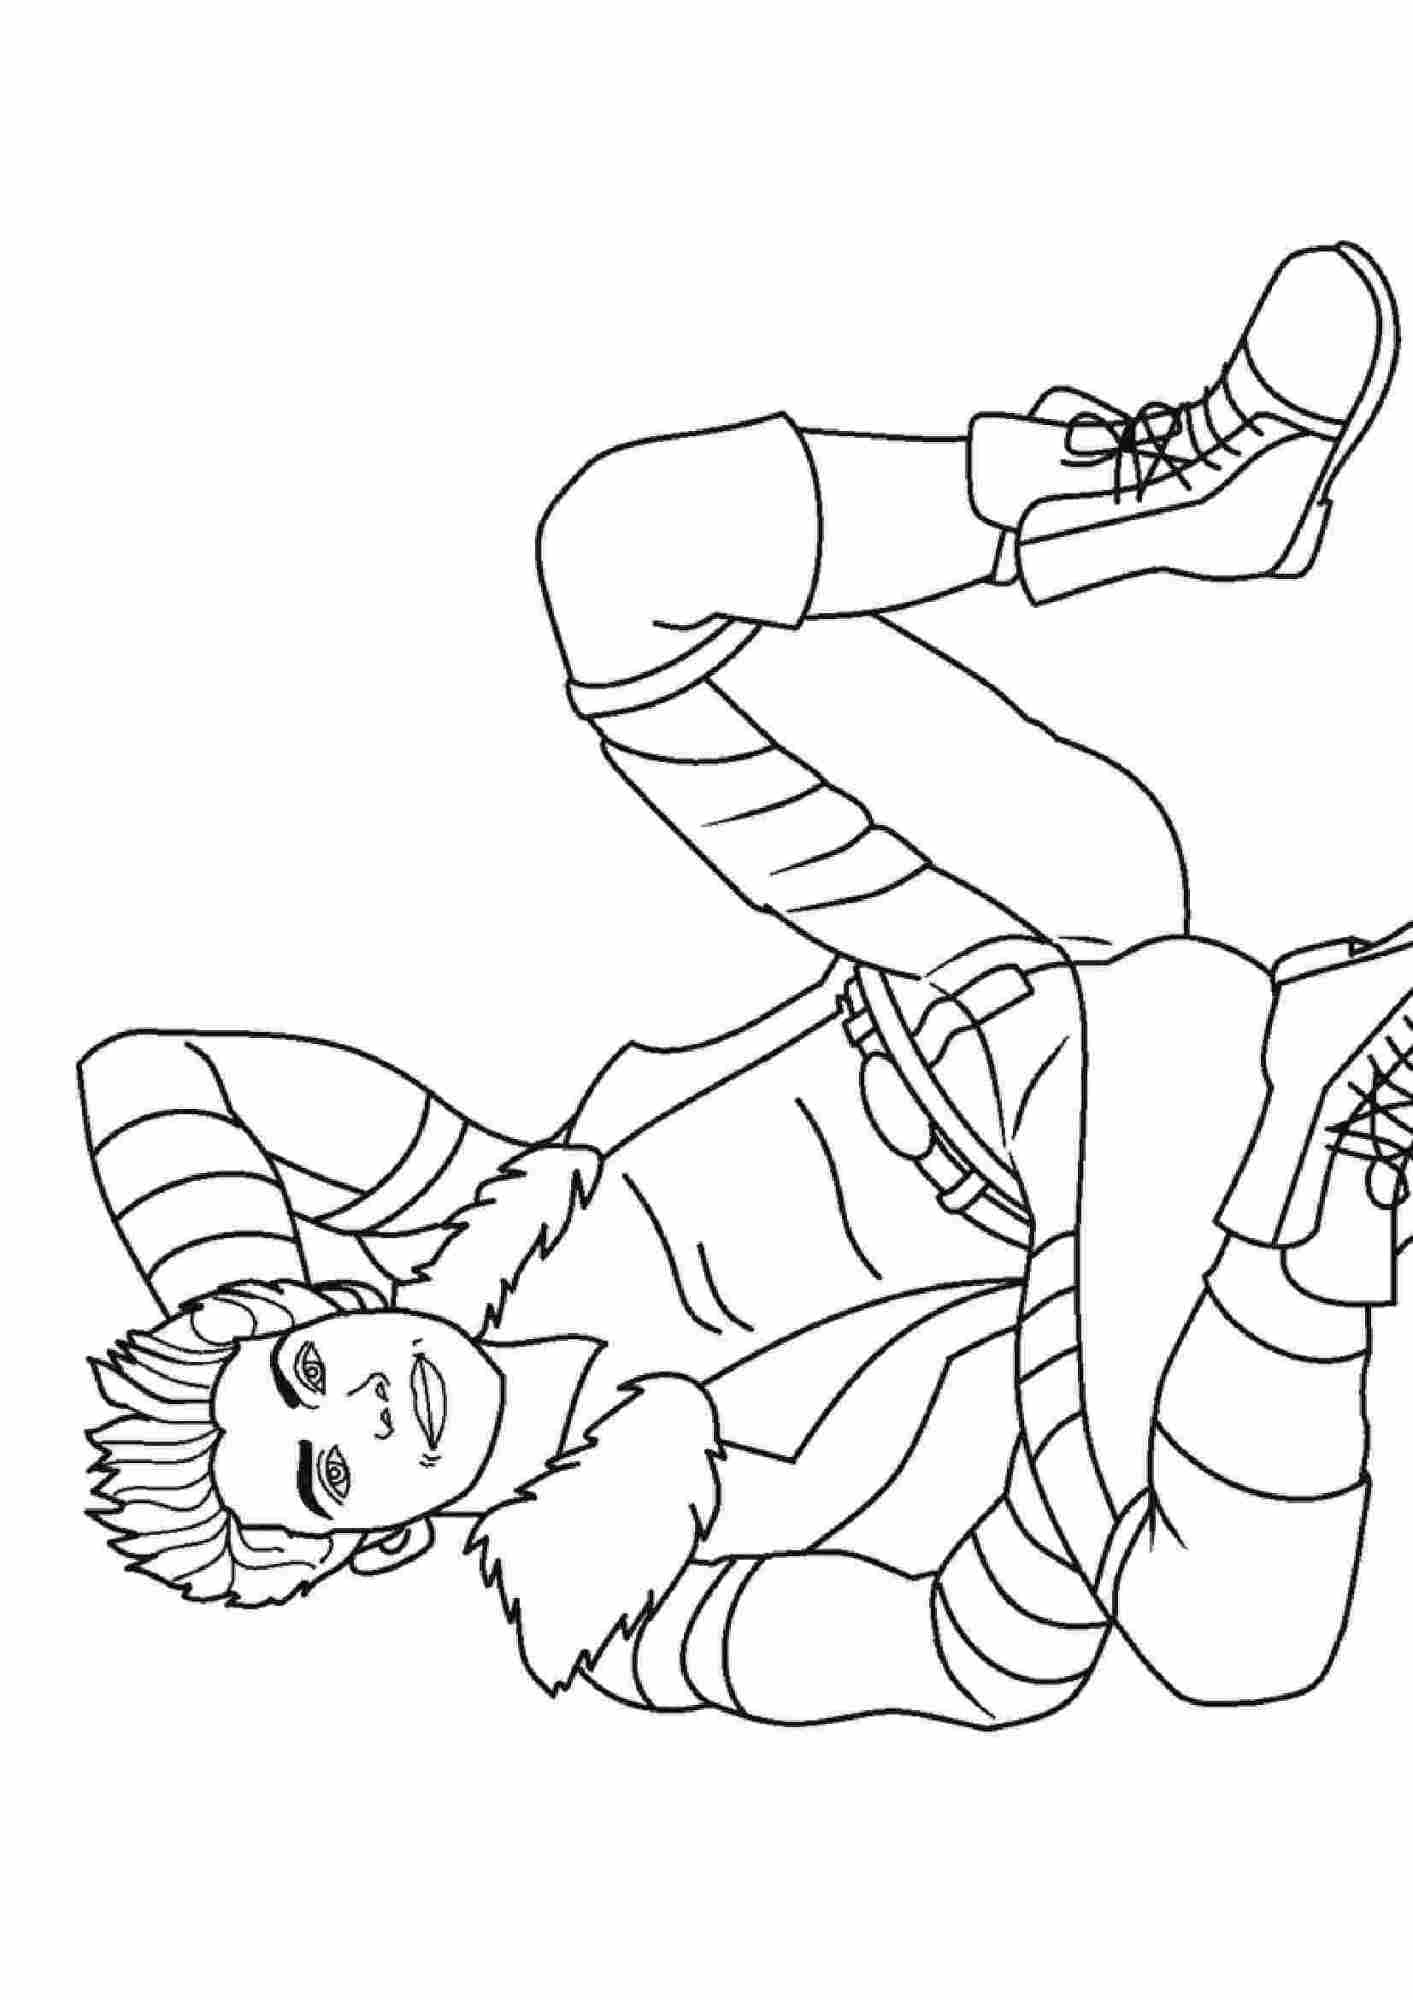 Carlos teenager relaxes from Descendant Coloring Page